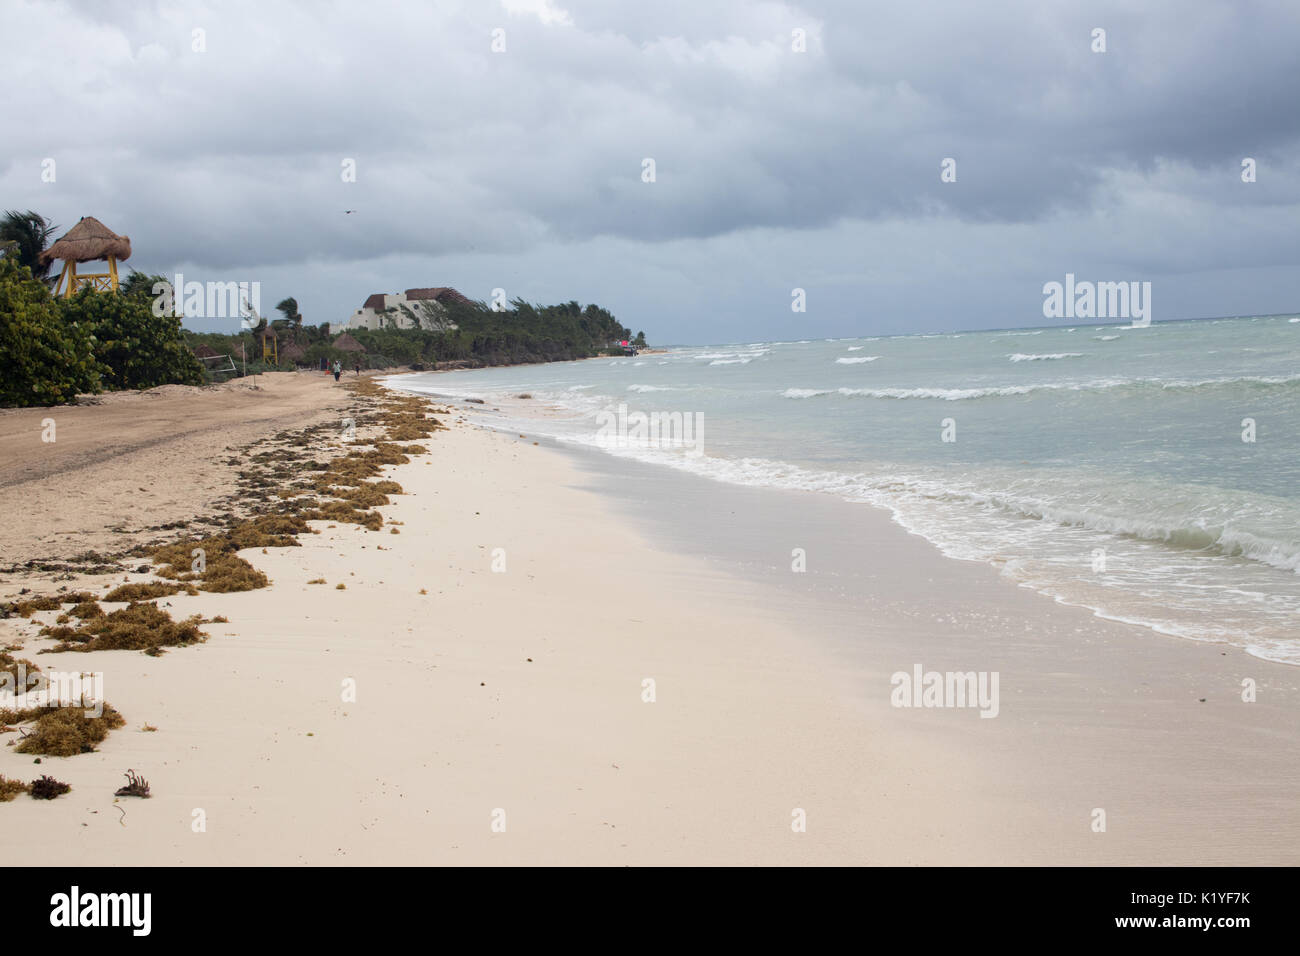 Tropical Caribbean beach with stormy sky as Tropical Storm Harvey passes. Stock Photo